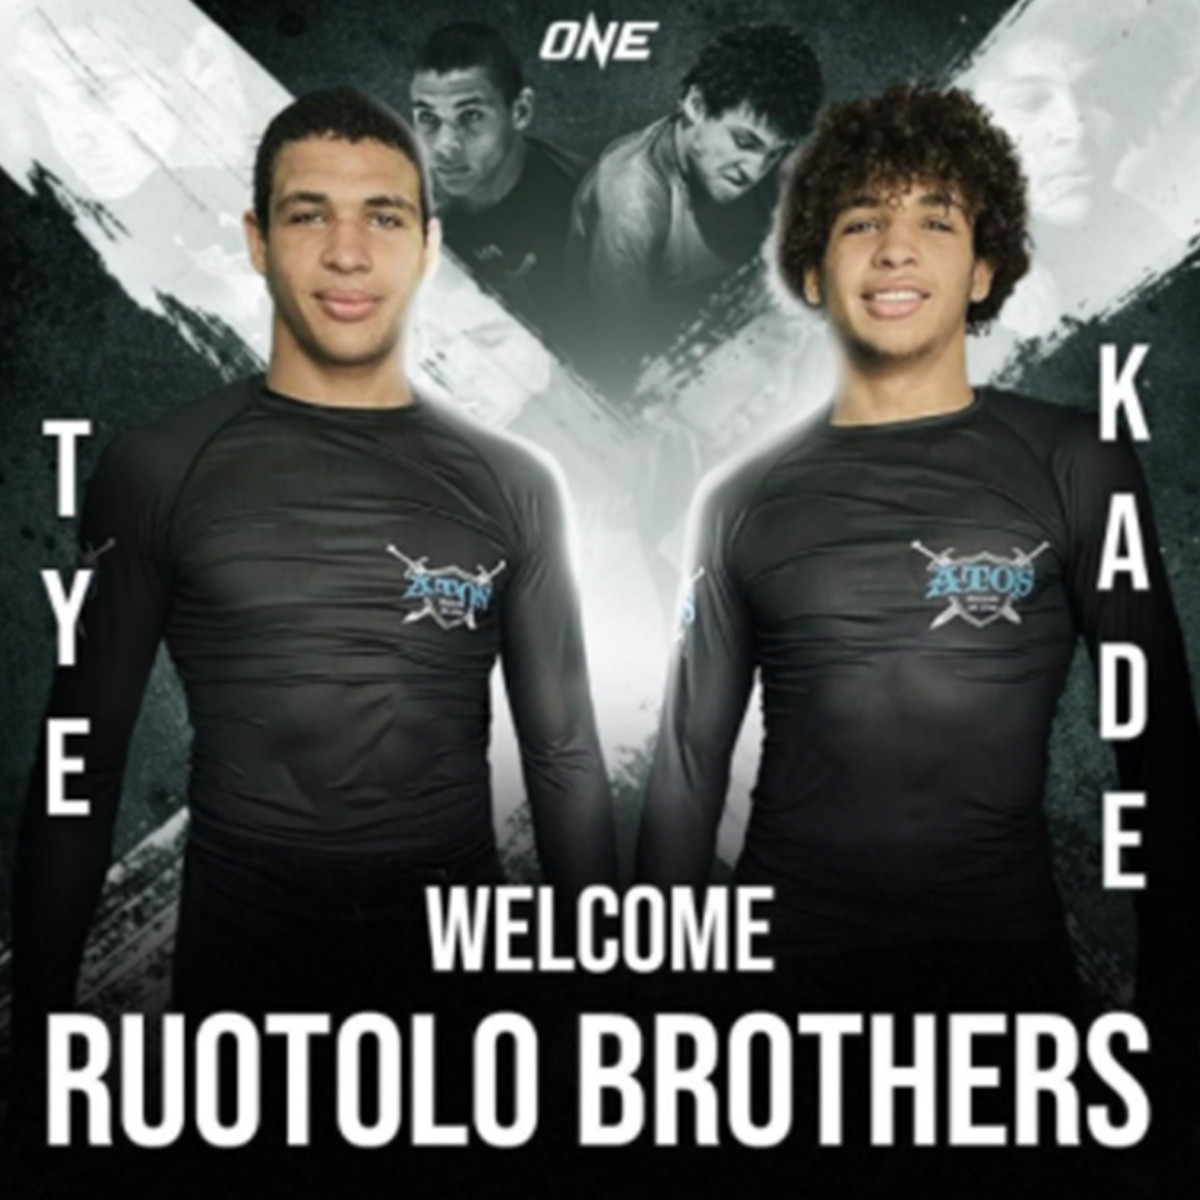 ONE, ONE FC, ONE Championship, ONE Championship FC, Ruotolo Brothers, Bjj News, Submission Grappling,